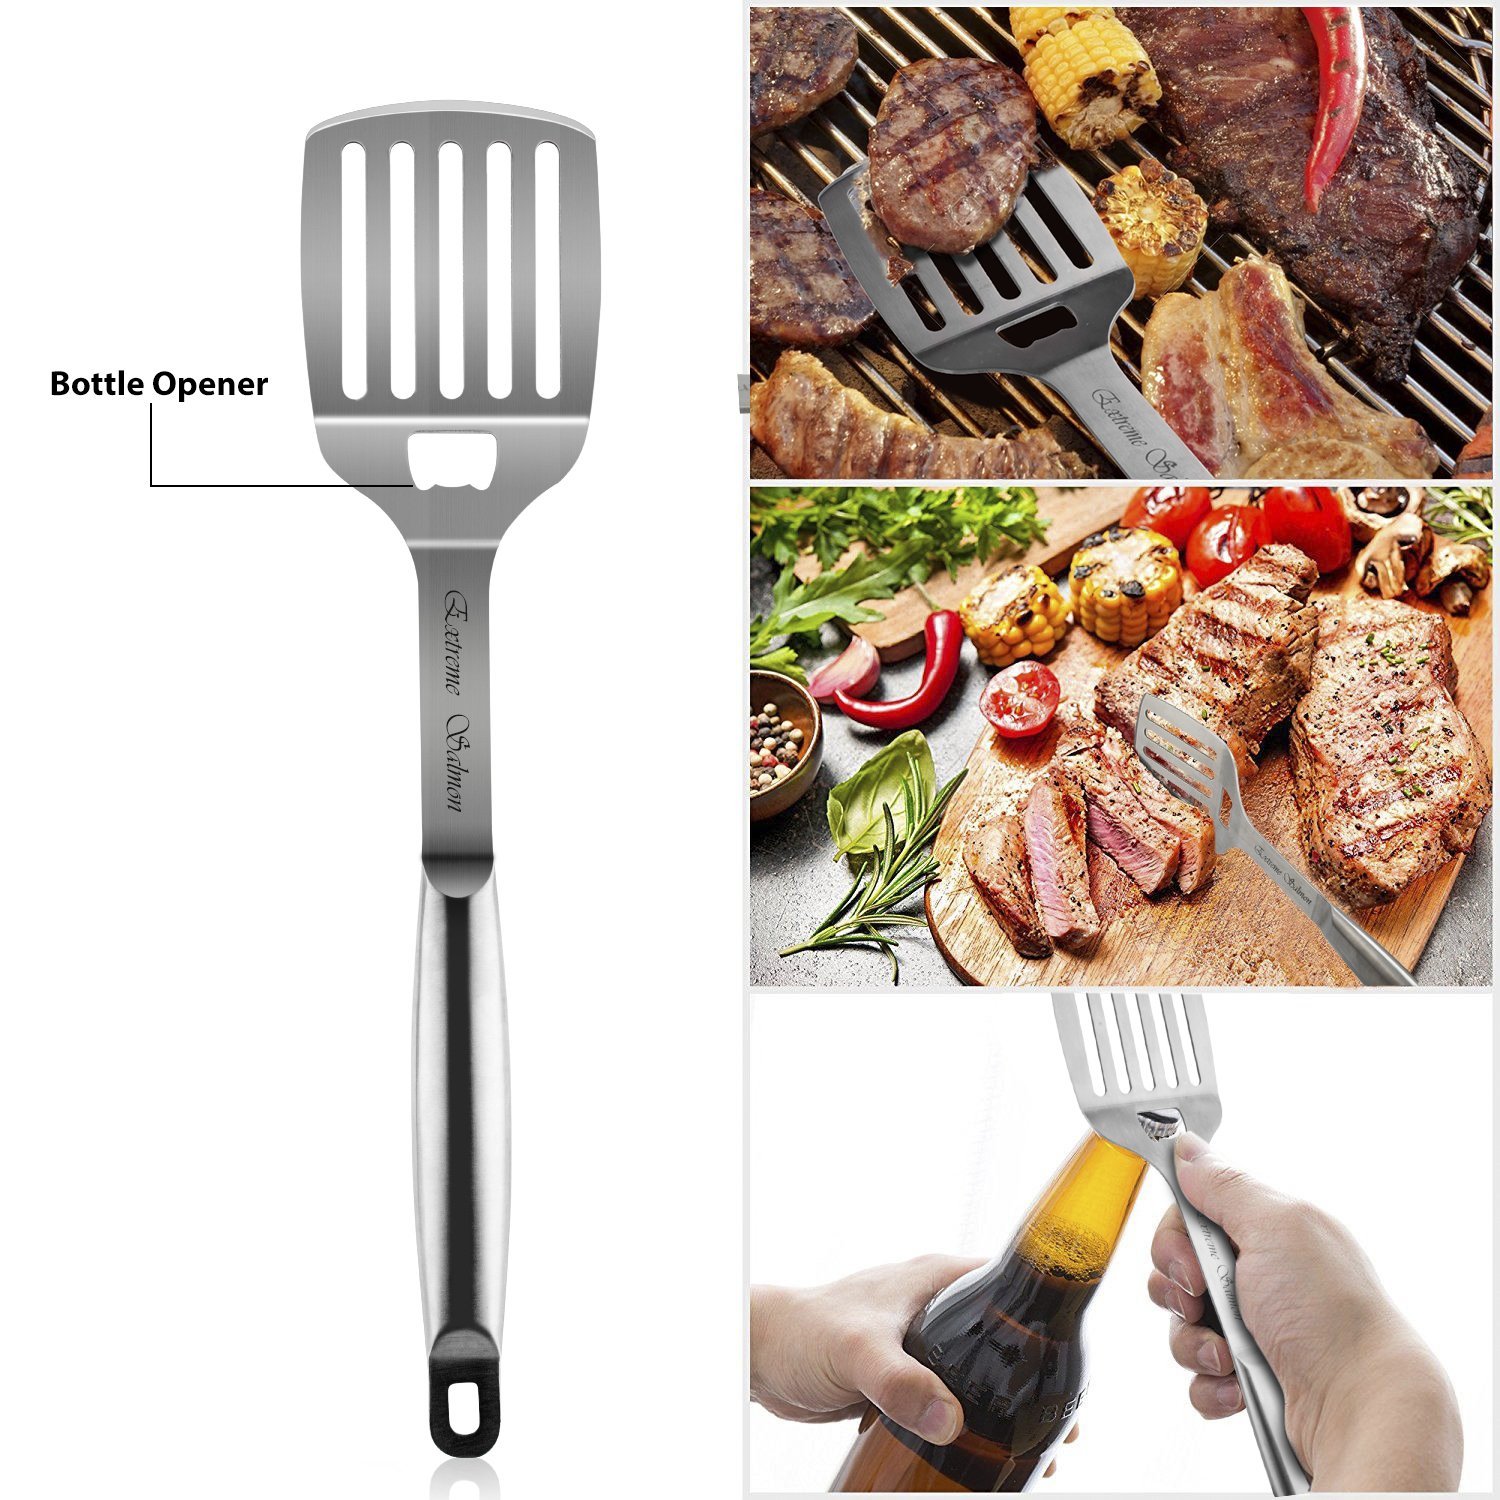 Grill Accessories, BBQ Tool Sets 7 PCS Grill Set Stainless Steel Grilling Utensils Heavy Duty Grill Tool Sets for Barbecue,Spatula,Tongs,Fork and 4 Skewers, Best Outdoor Grill Kit for Dad or Husband - image 4 of 7